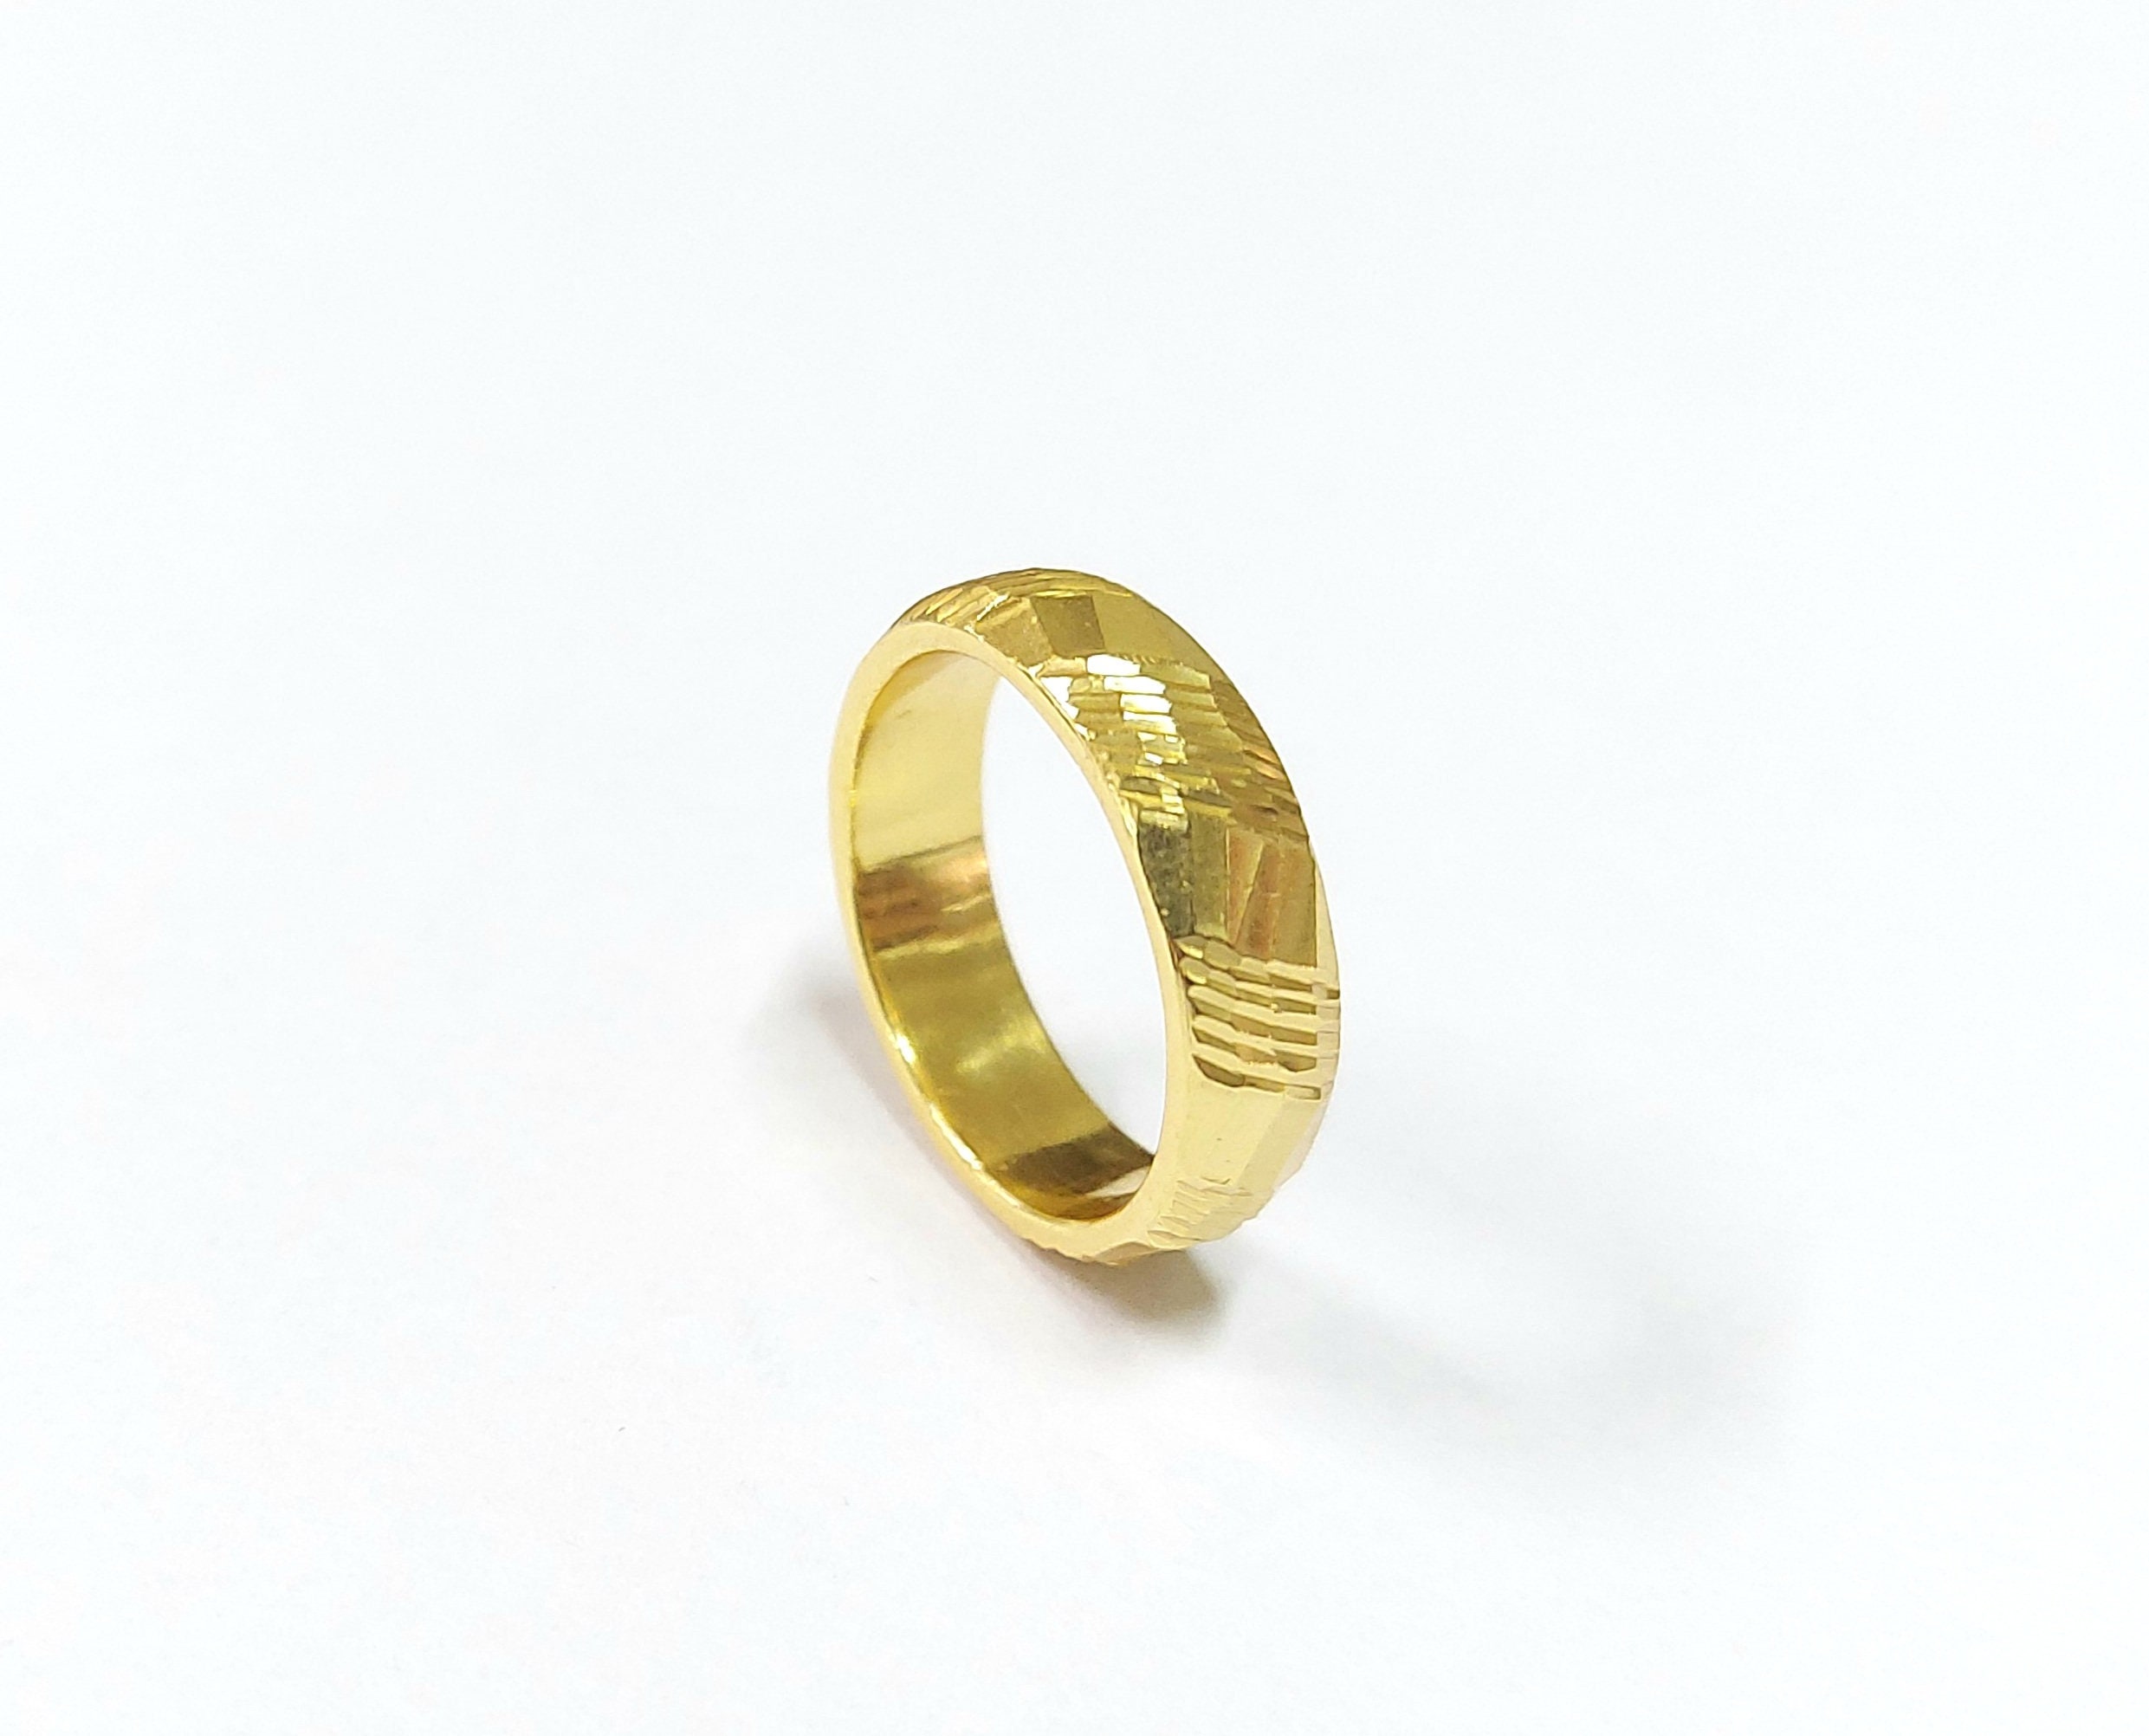 Lazer Cut Thick Solid Ring For Men, Gold Vermeil, Made in 925 Silver, Bands, Best Gift Him, Father's Day, 5 Mm Width